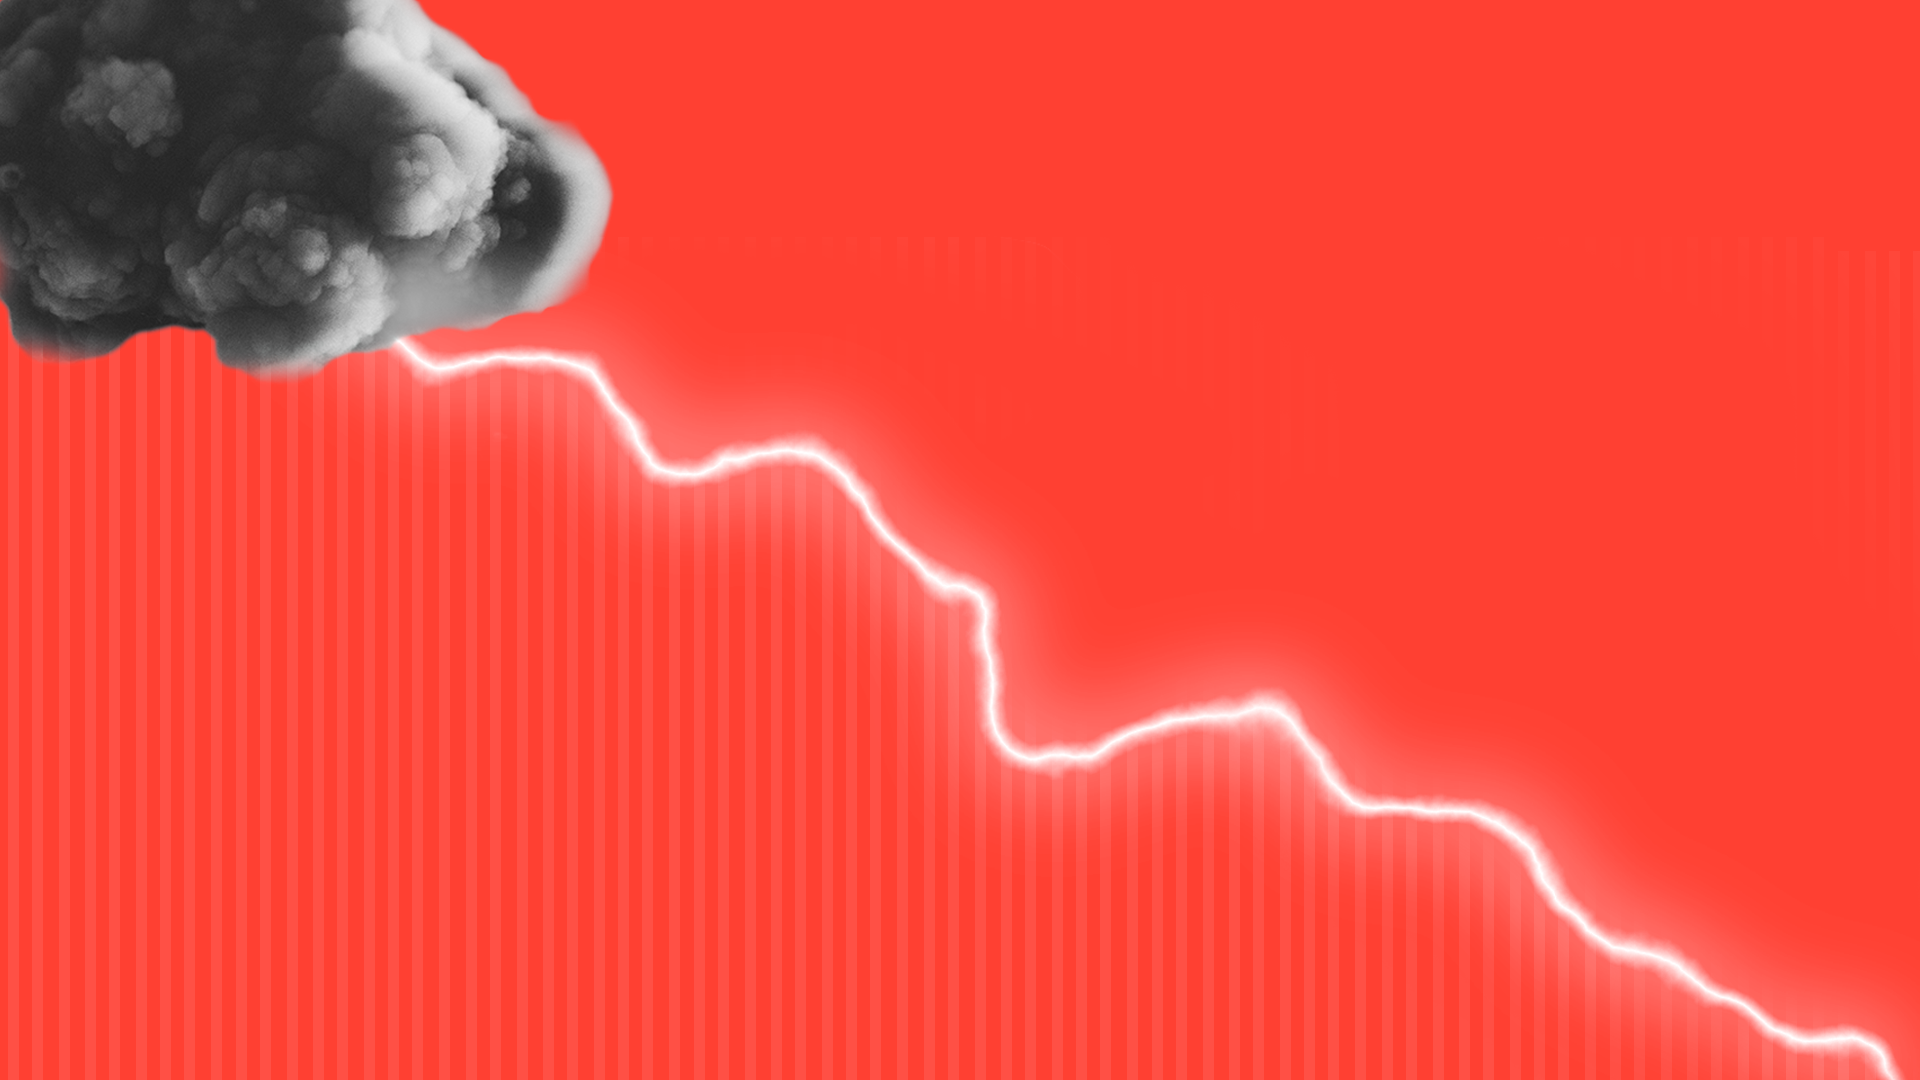 In this illustration, lightning from a storm cloud mimics a stock market downward line.